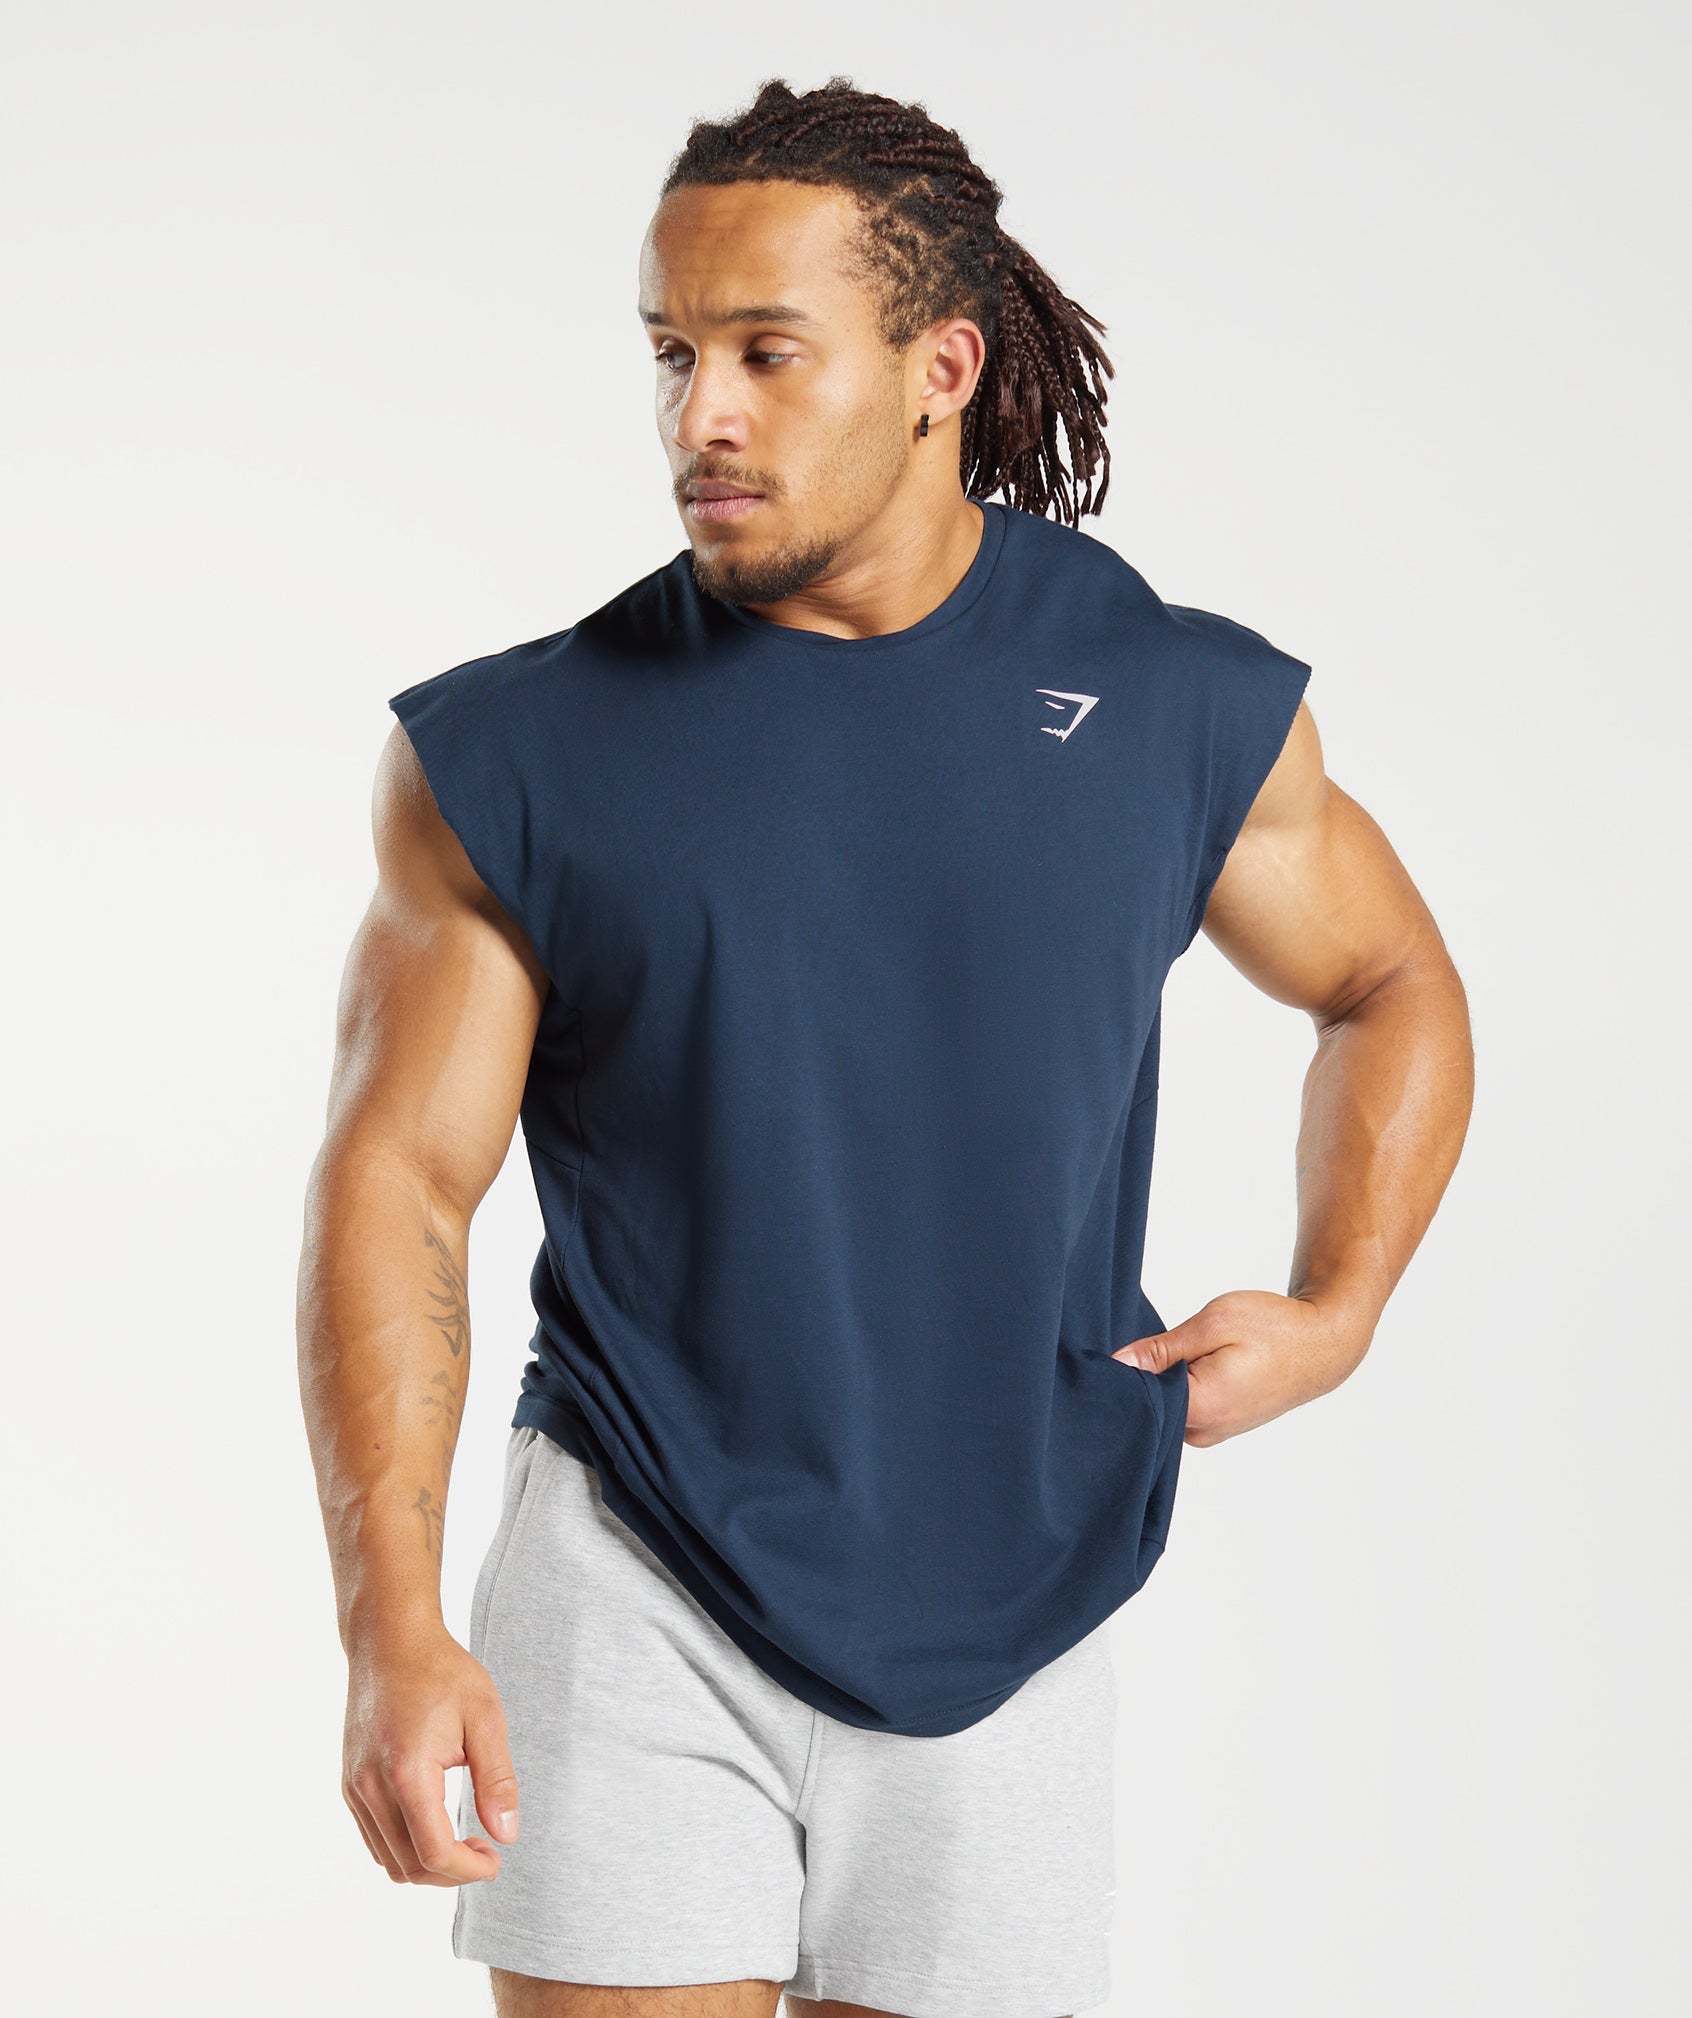 React Cut Off Tank in Navy - view 1